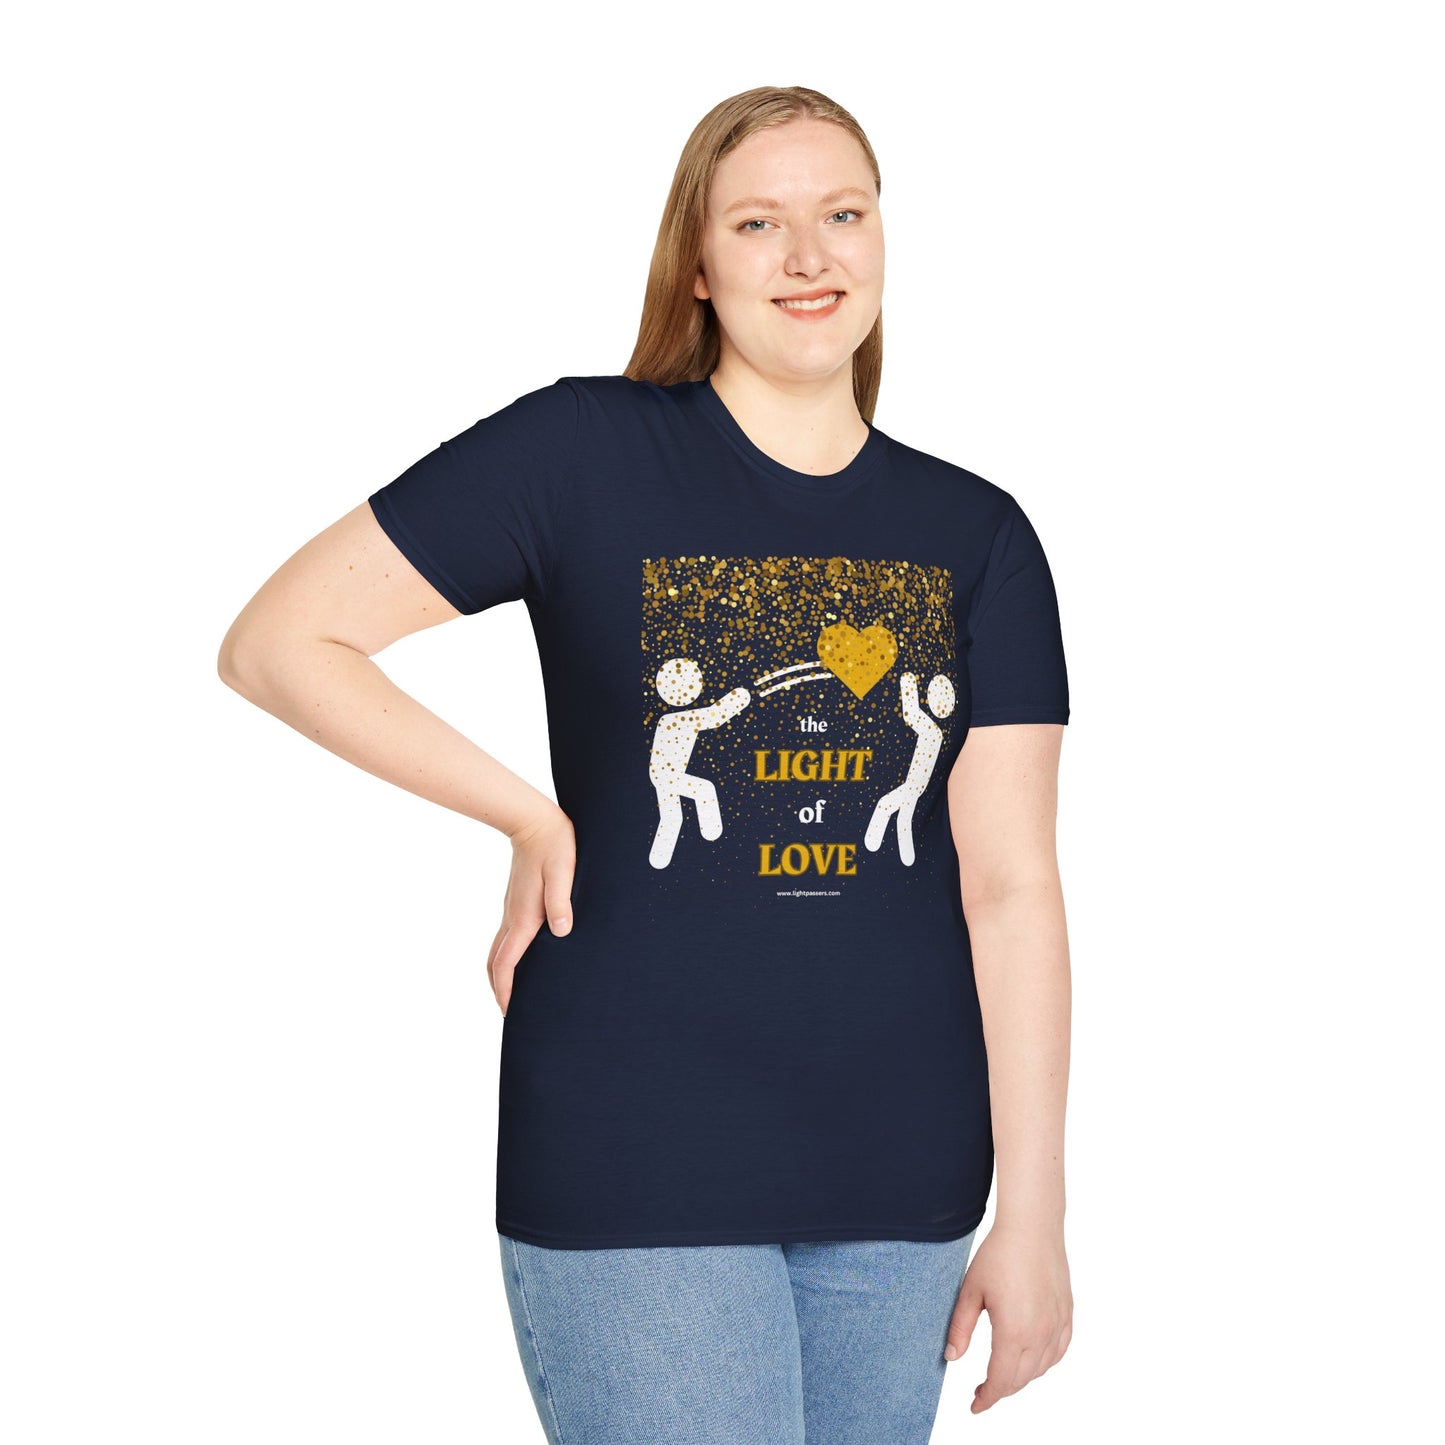 Light Passers Marketplace PASS the LIGHT of LOVE 2 figures gold heart Unisex Soft T-Shirt  Simple Messages, Mental Health